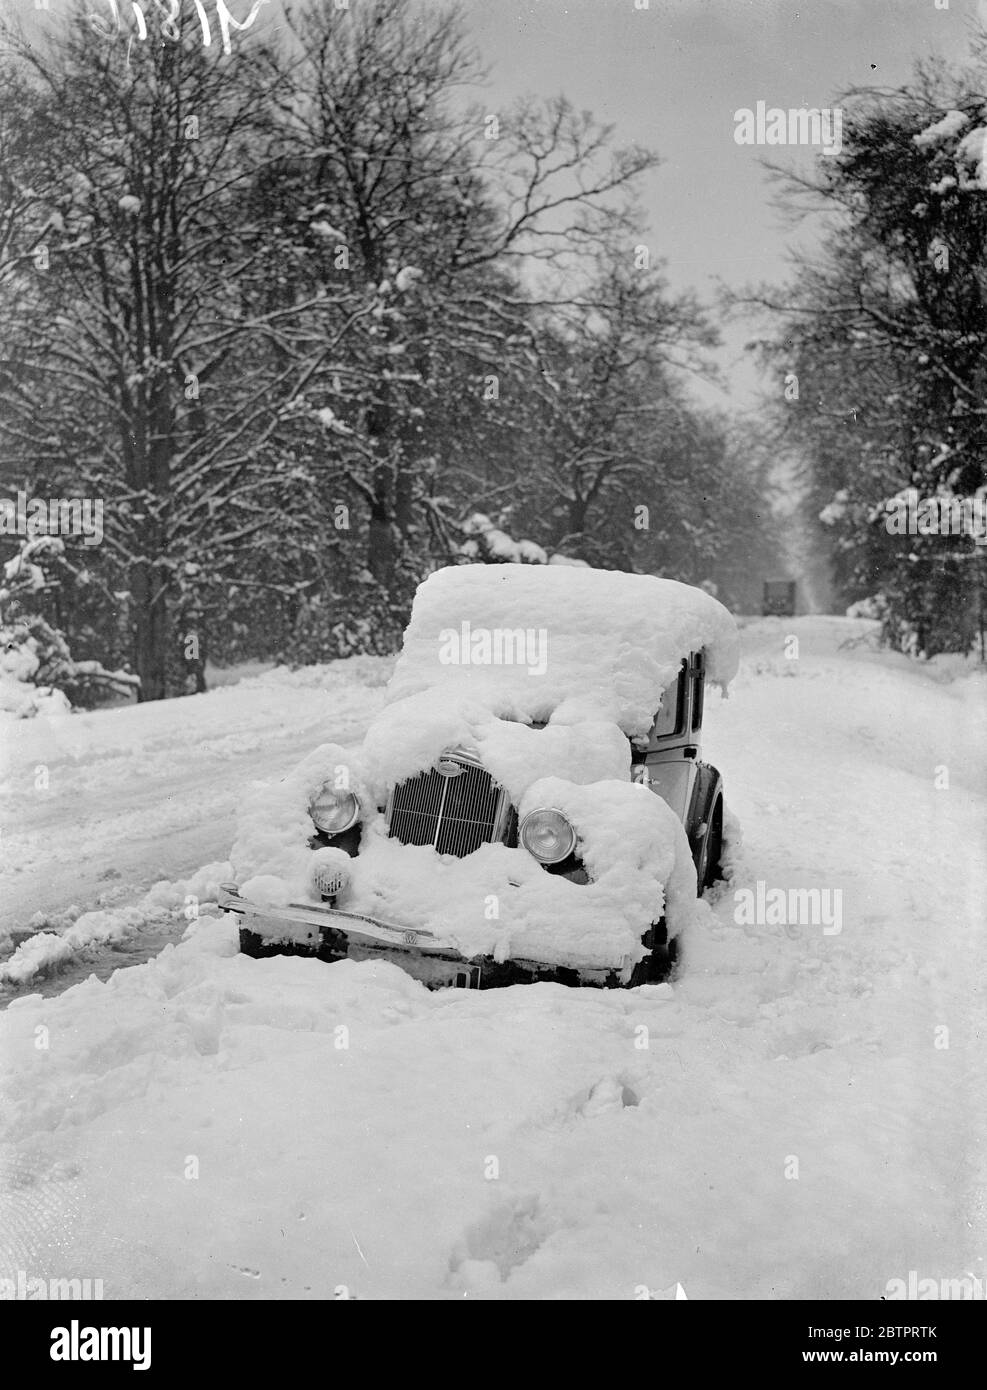 Snow 'derelict' in Hampshire. The worst December snow storms for many years have brought chaos to the road in Southern England, where cars have been left to the tender mercies of the snow on many important roads while the drivers seek shelter. Photo shows, and abandoned cart thickly covered with snow on the Cadnum - Ringwood Road in Hampshire. 9 December 1937 Stock Photo